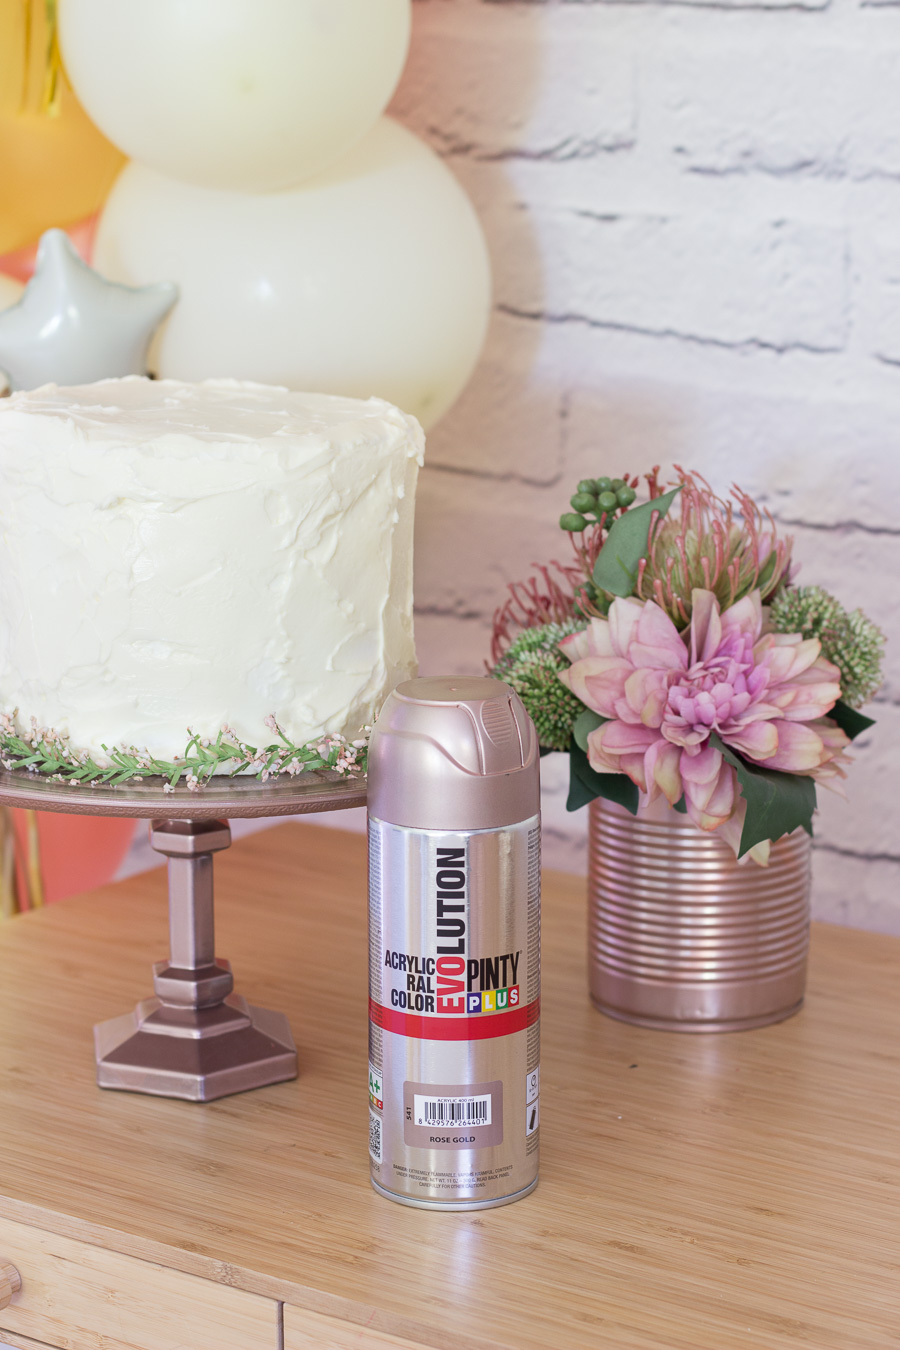 How to make a cake stand with rose gold spray paint - Pintyplus